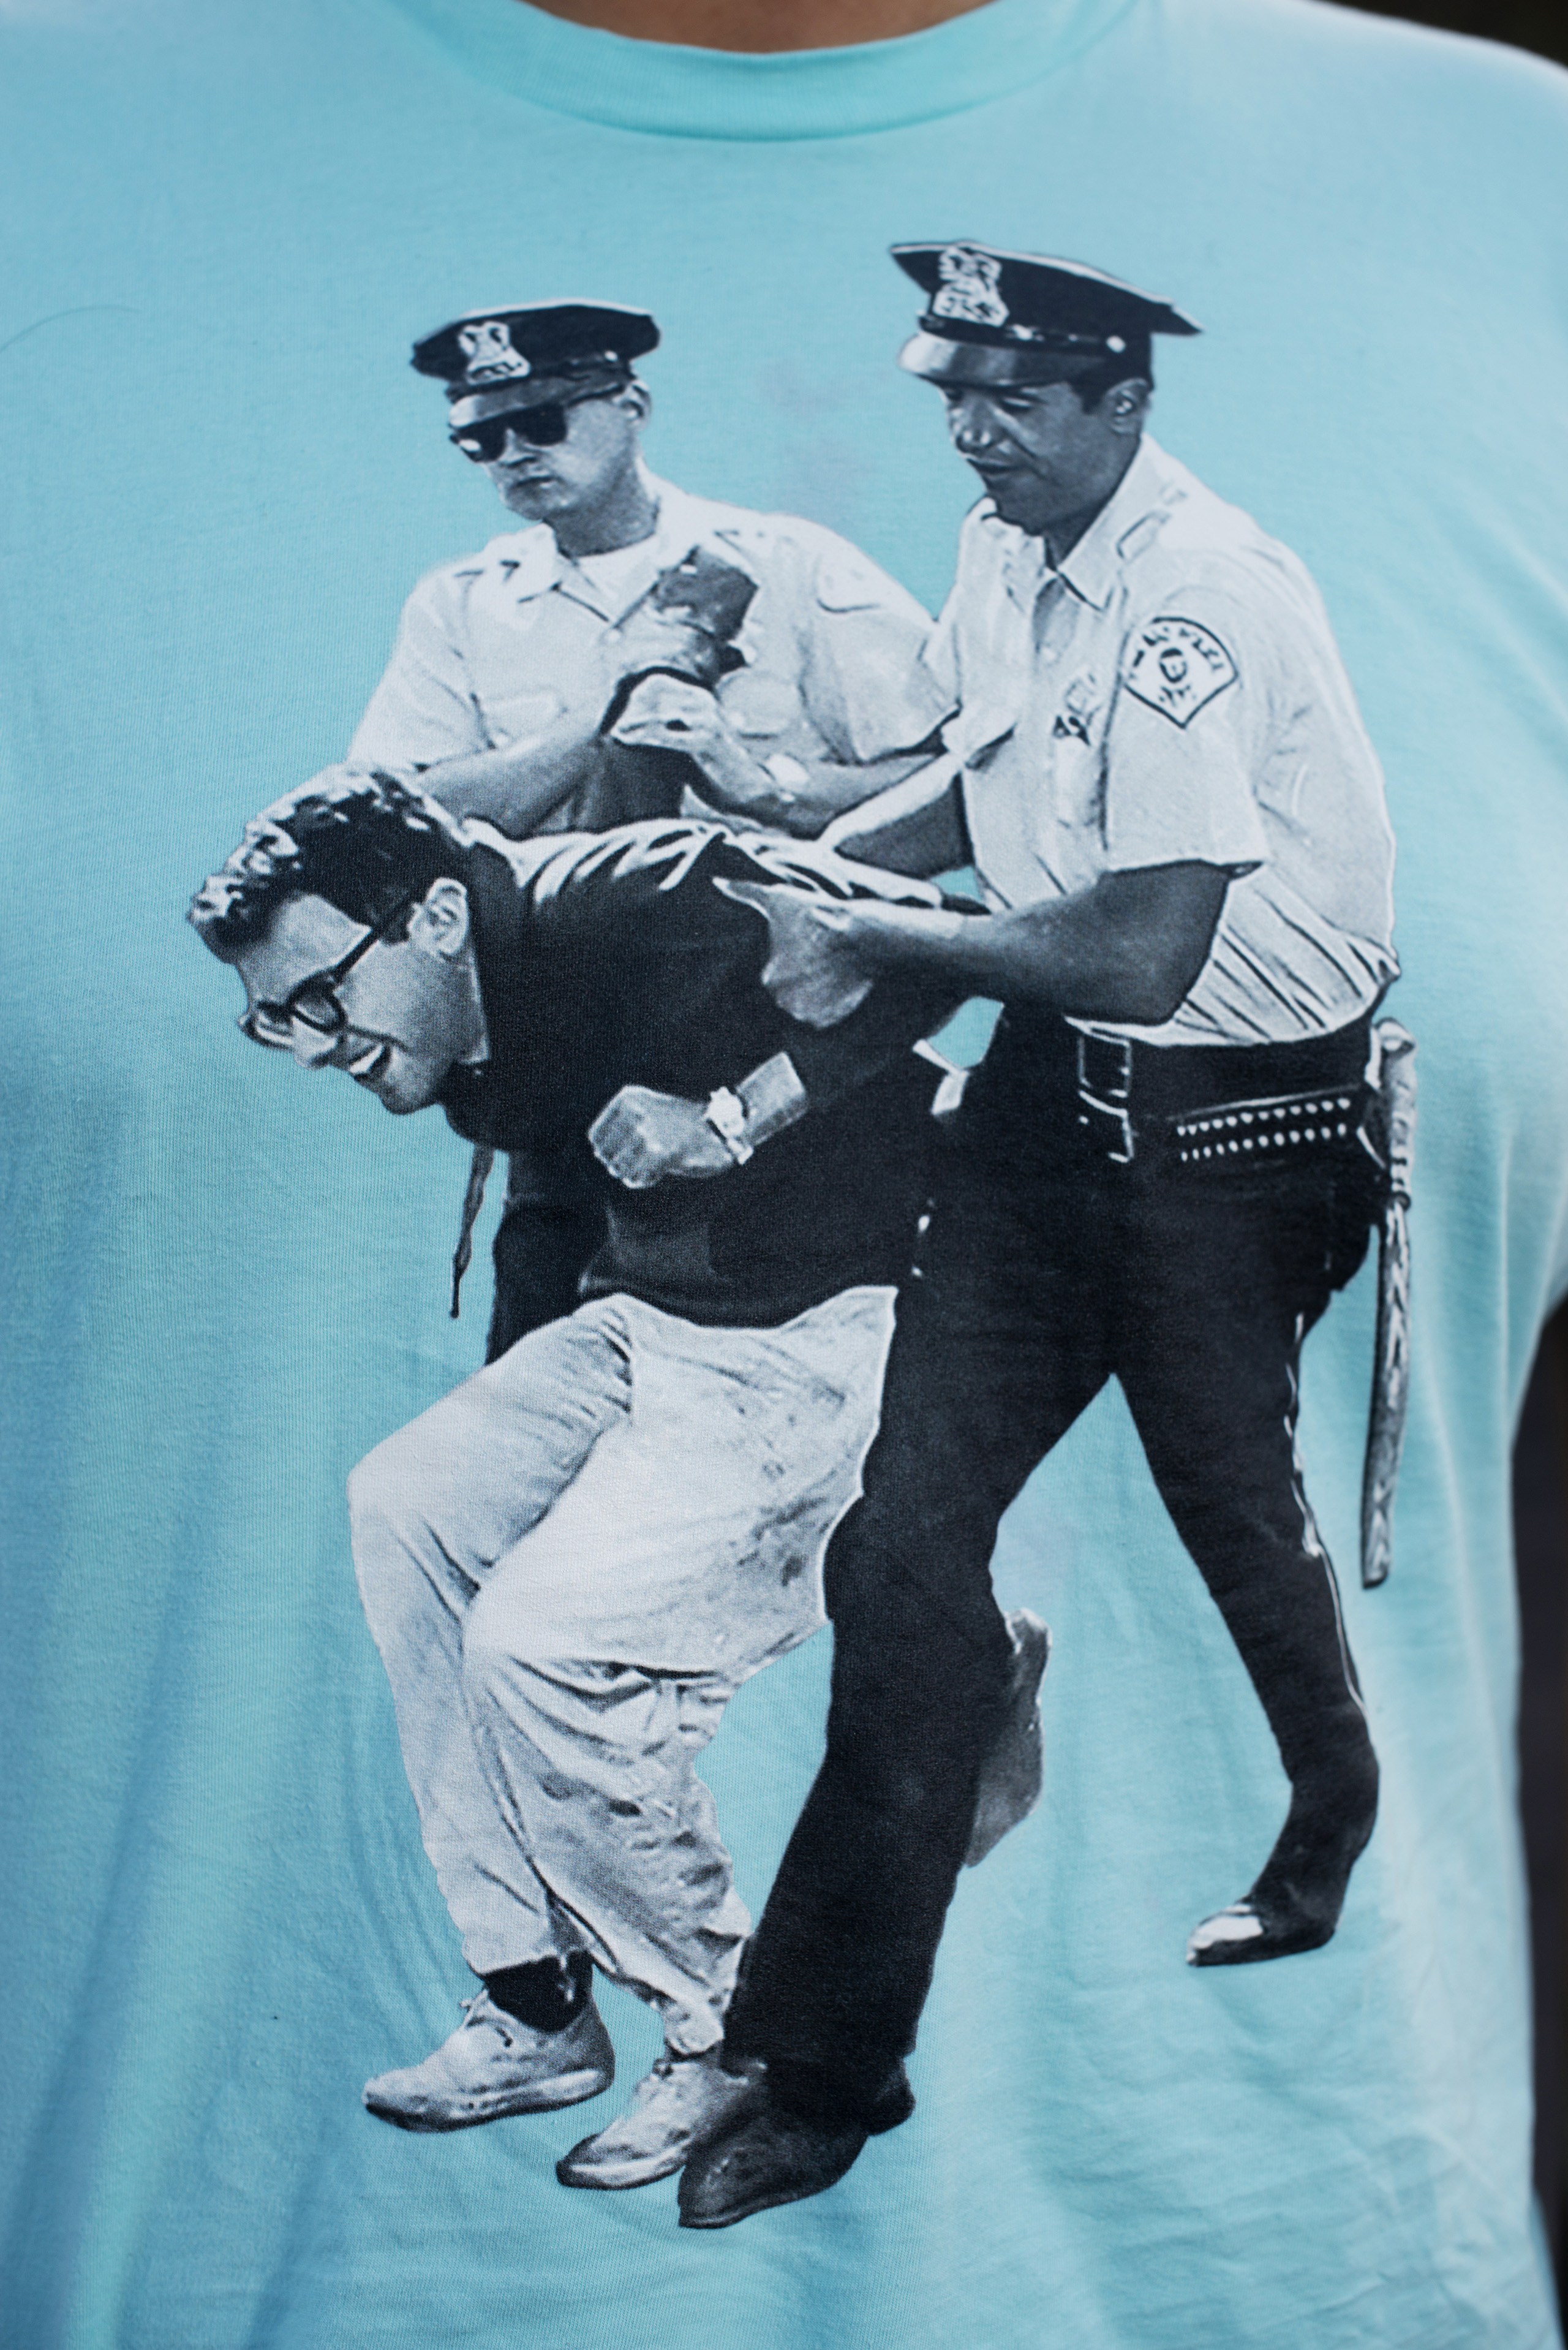 Detail of a Bernie Sanders supporter's t-shirt at a campaign rally at Irvine Meadows Amphitheatre in Irvine, Calif., May 22, 2016. The t-shirt shows an image of 21-year-old Sanders being arrested at a protest in Chicago in 1963.